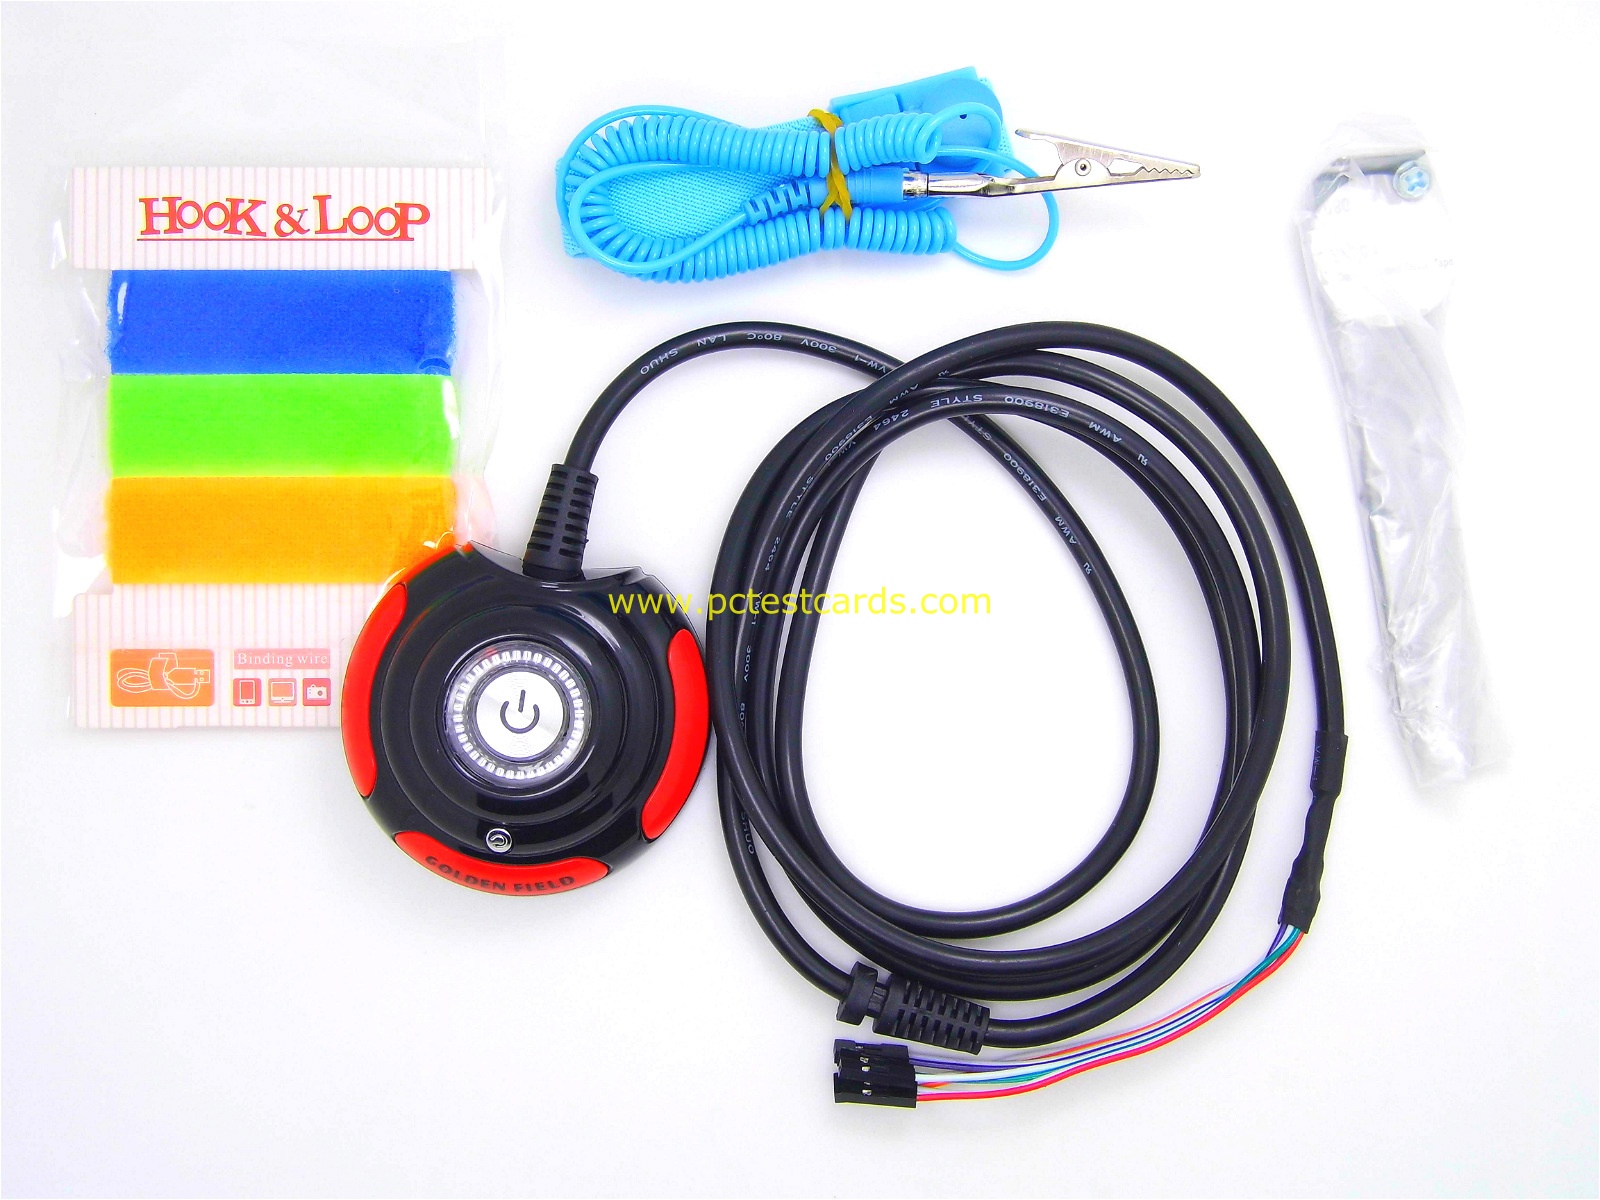 New PC Motherboard Power Reset Switch LED Cable with Antistatic Wrist Strap